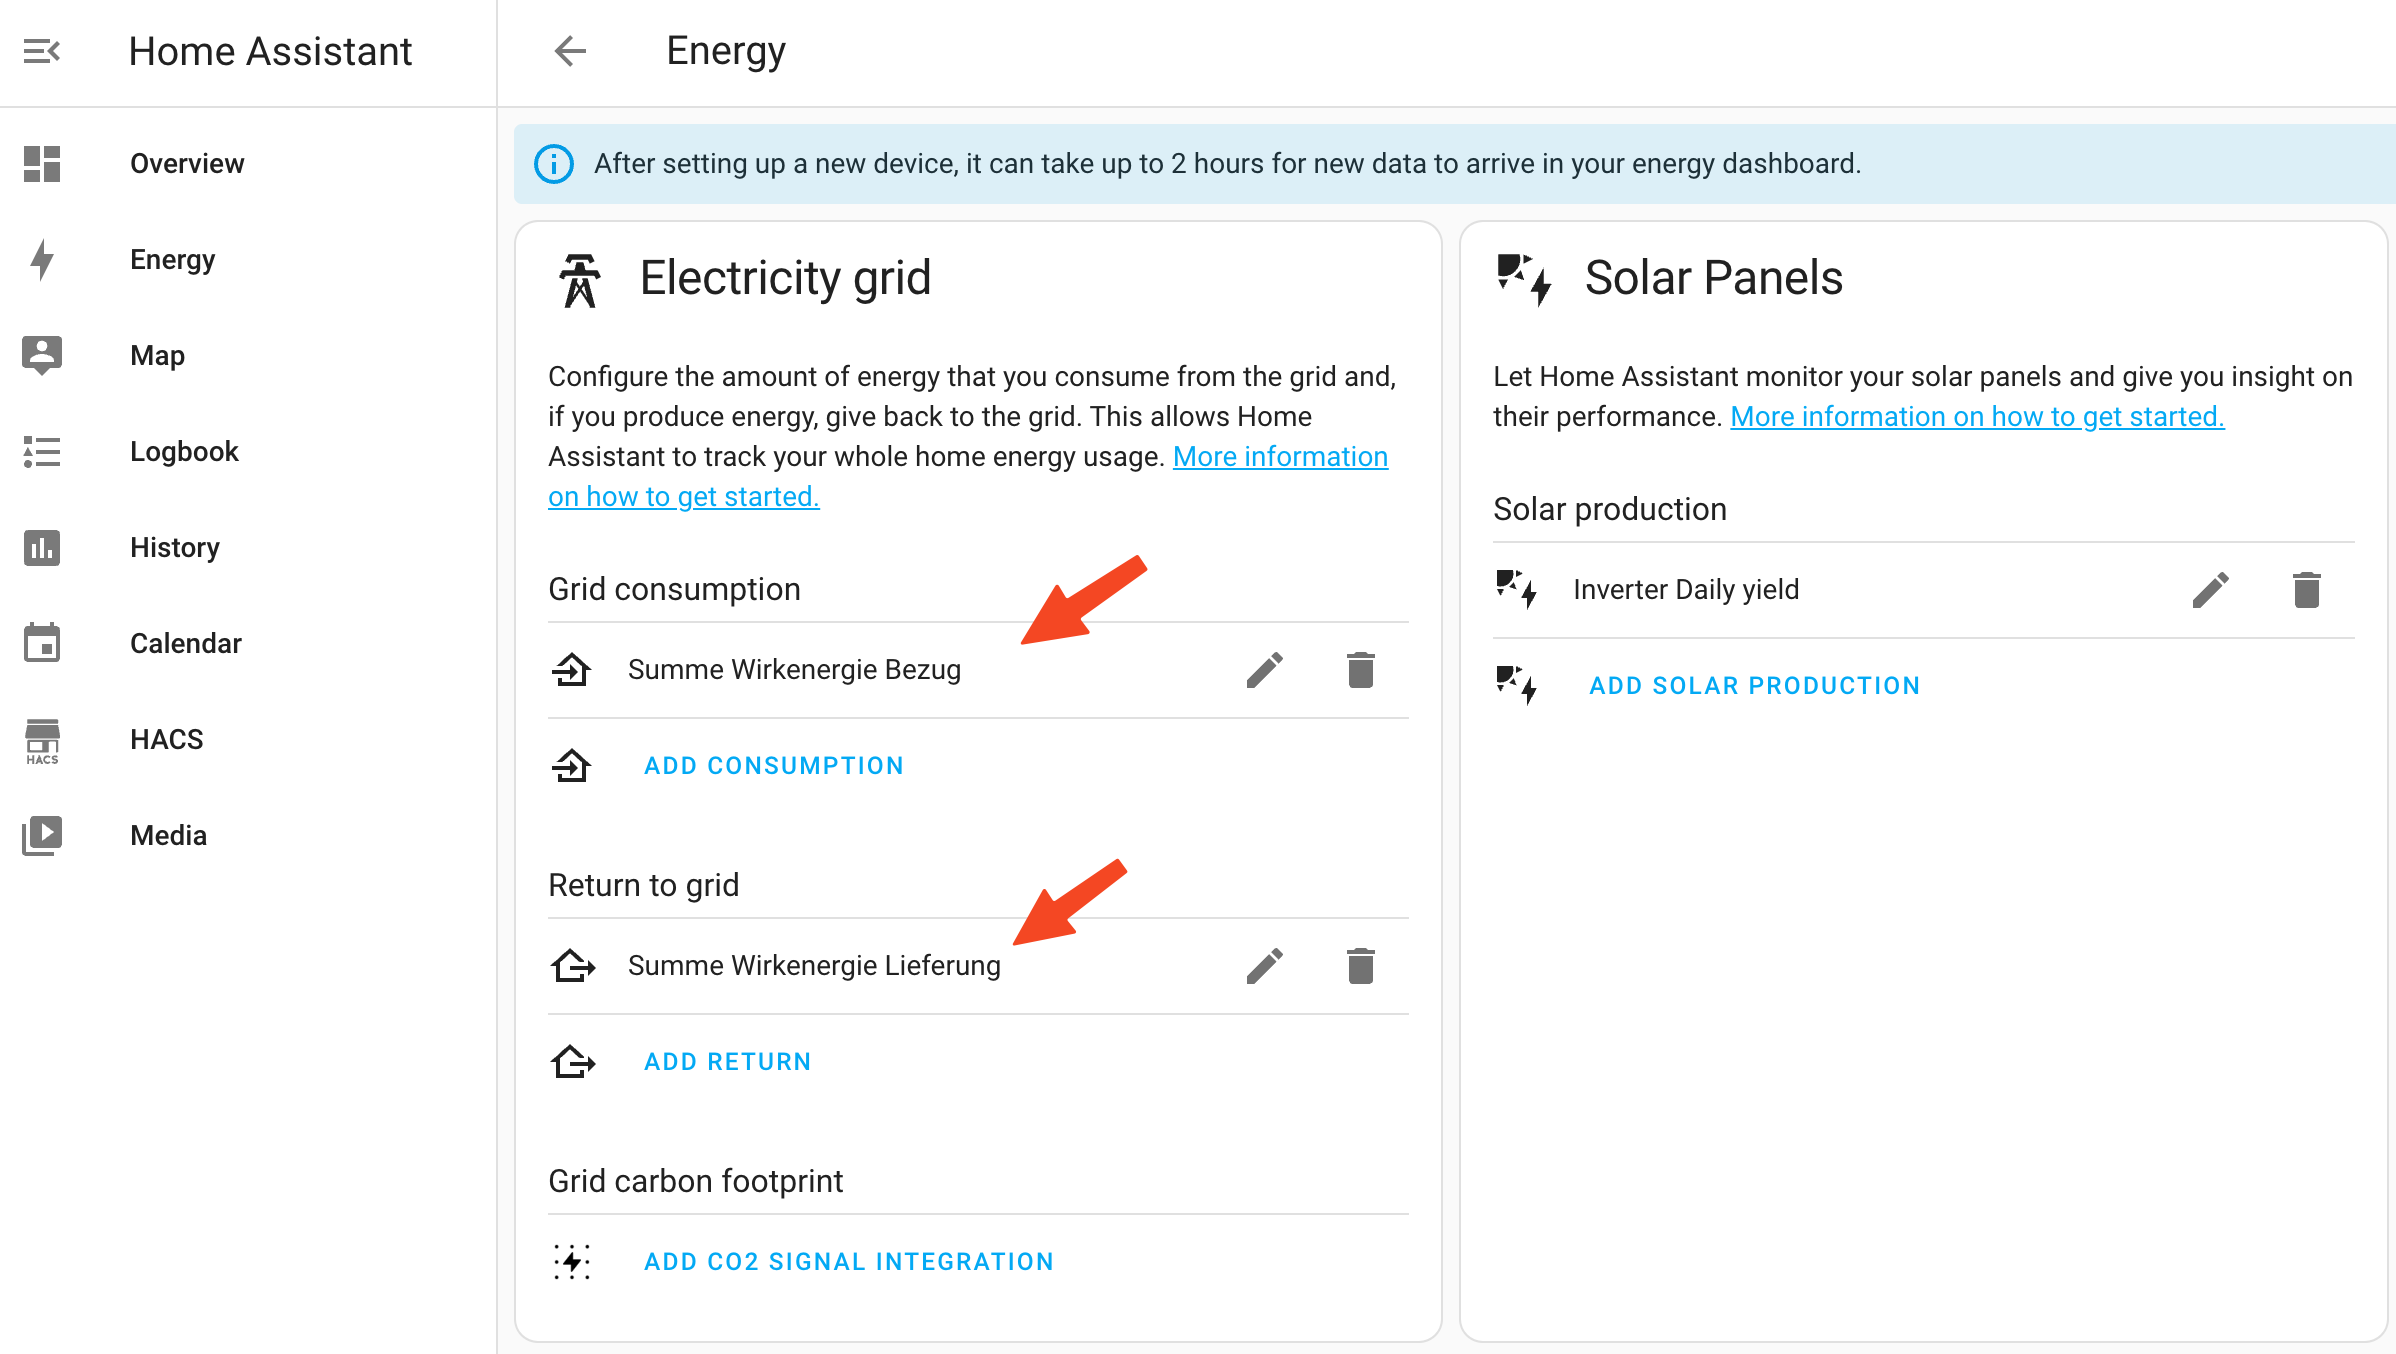 Home Assistant energy dashboard configuration